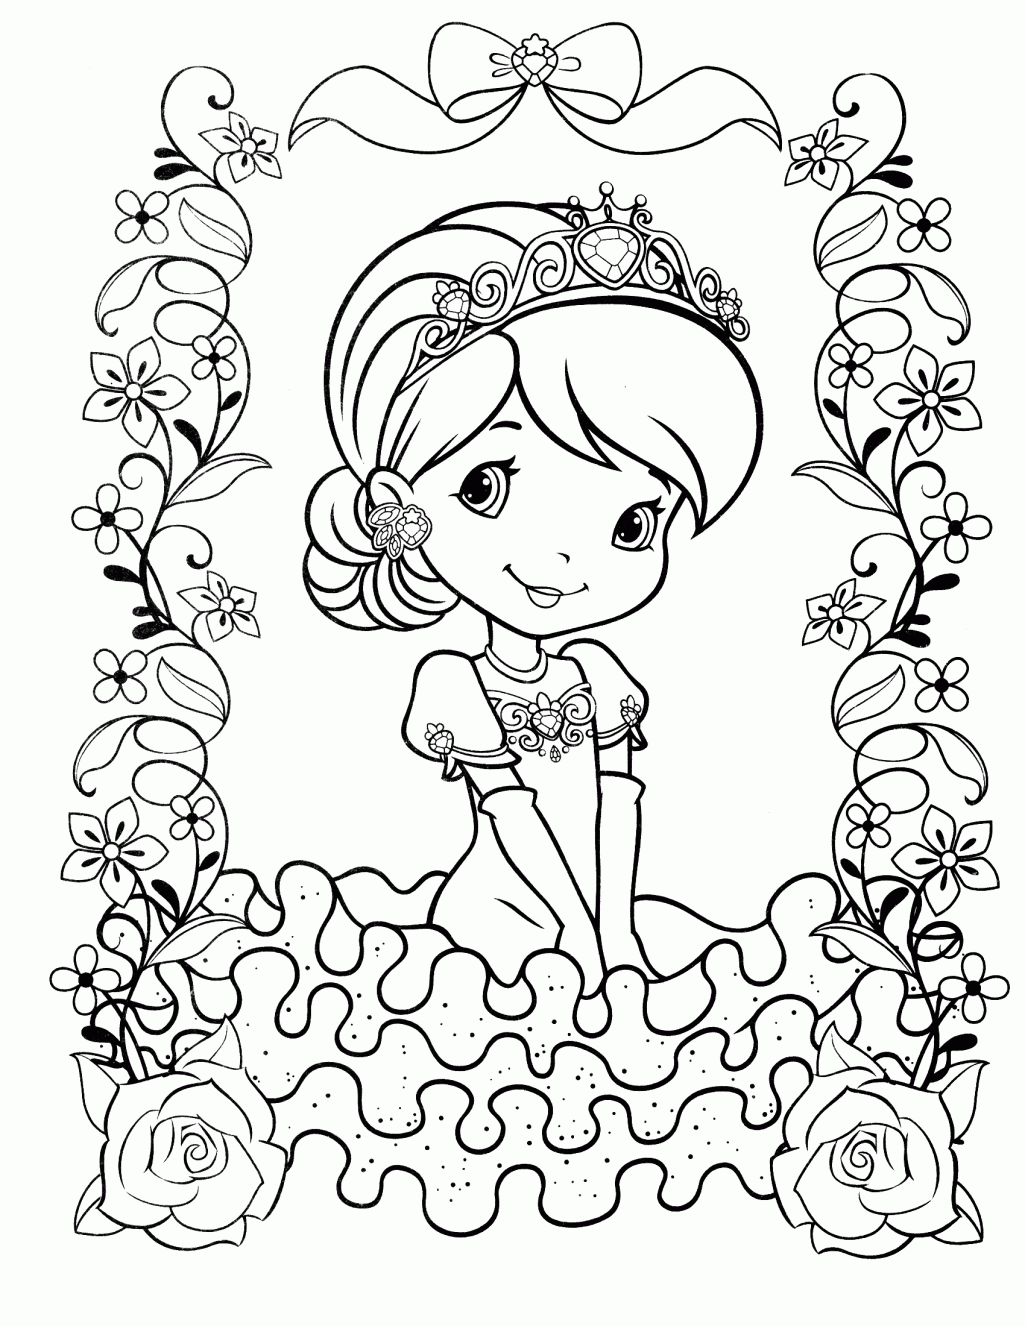 free-princess-coloring-pages-download-free-princess-coloring-pages-png-images-free-cliparts